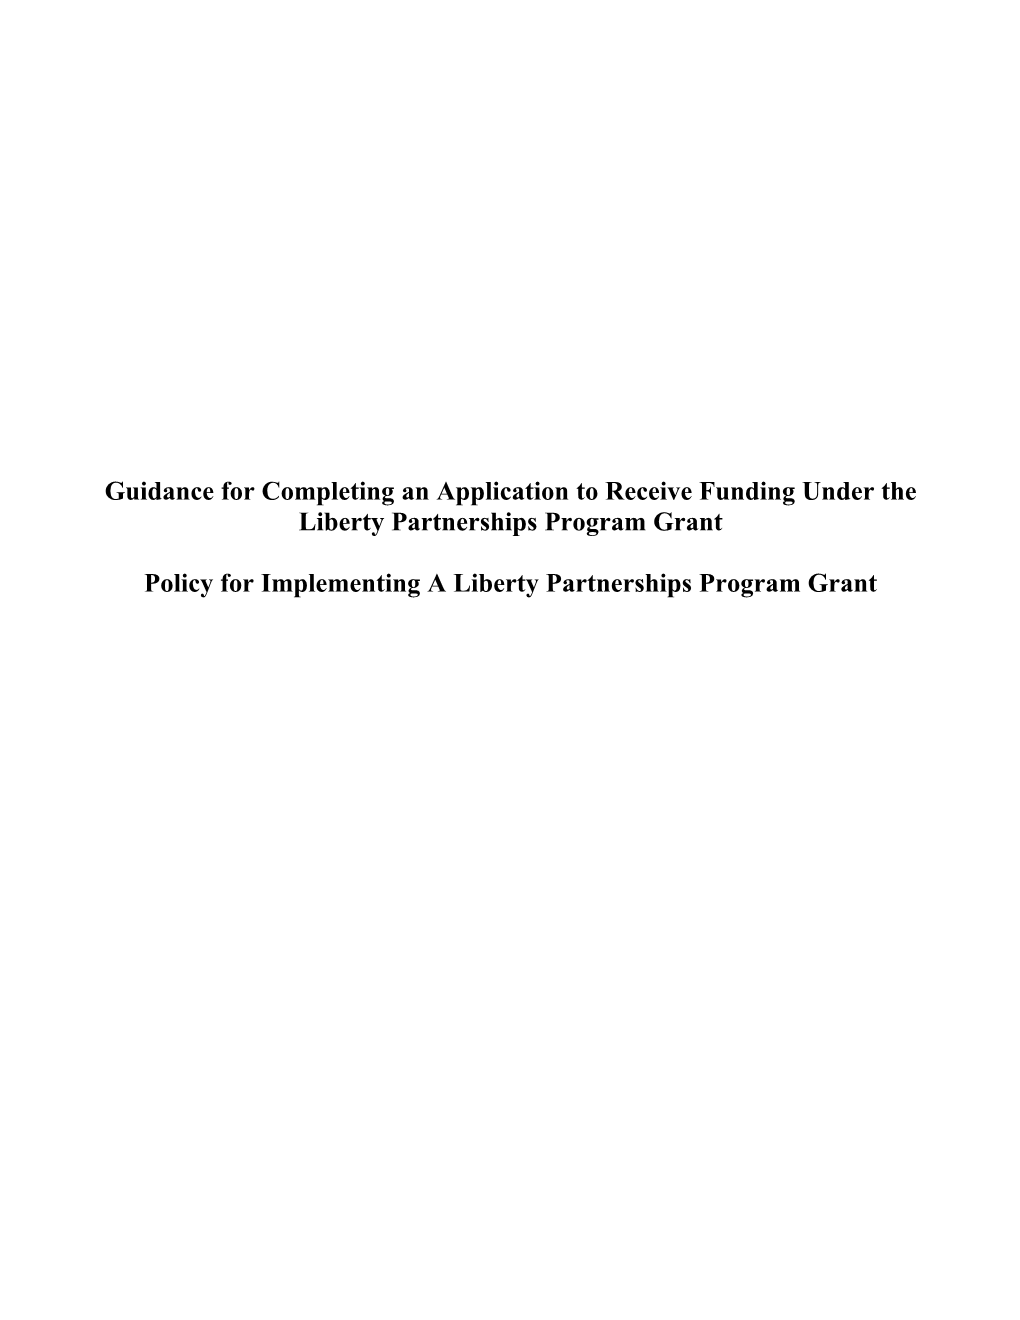 Guidance & Policy for Completing an Application to Receive Funding Under the Liberty